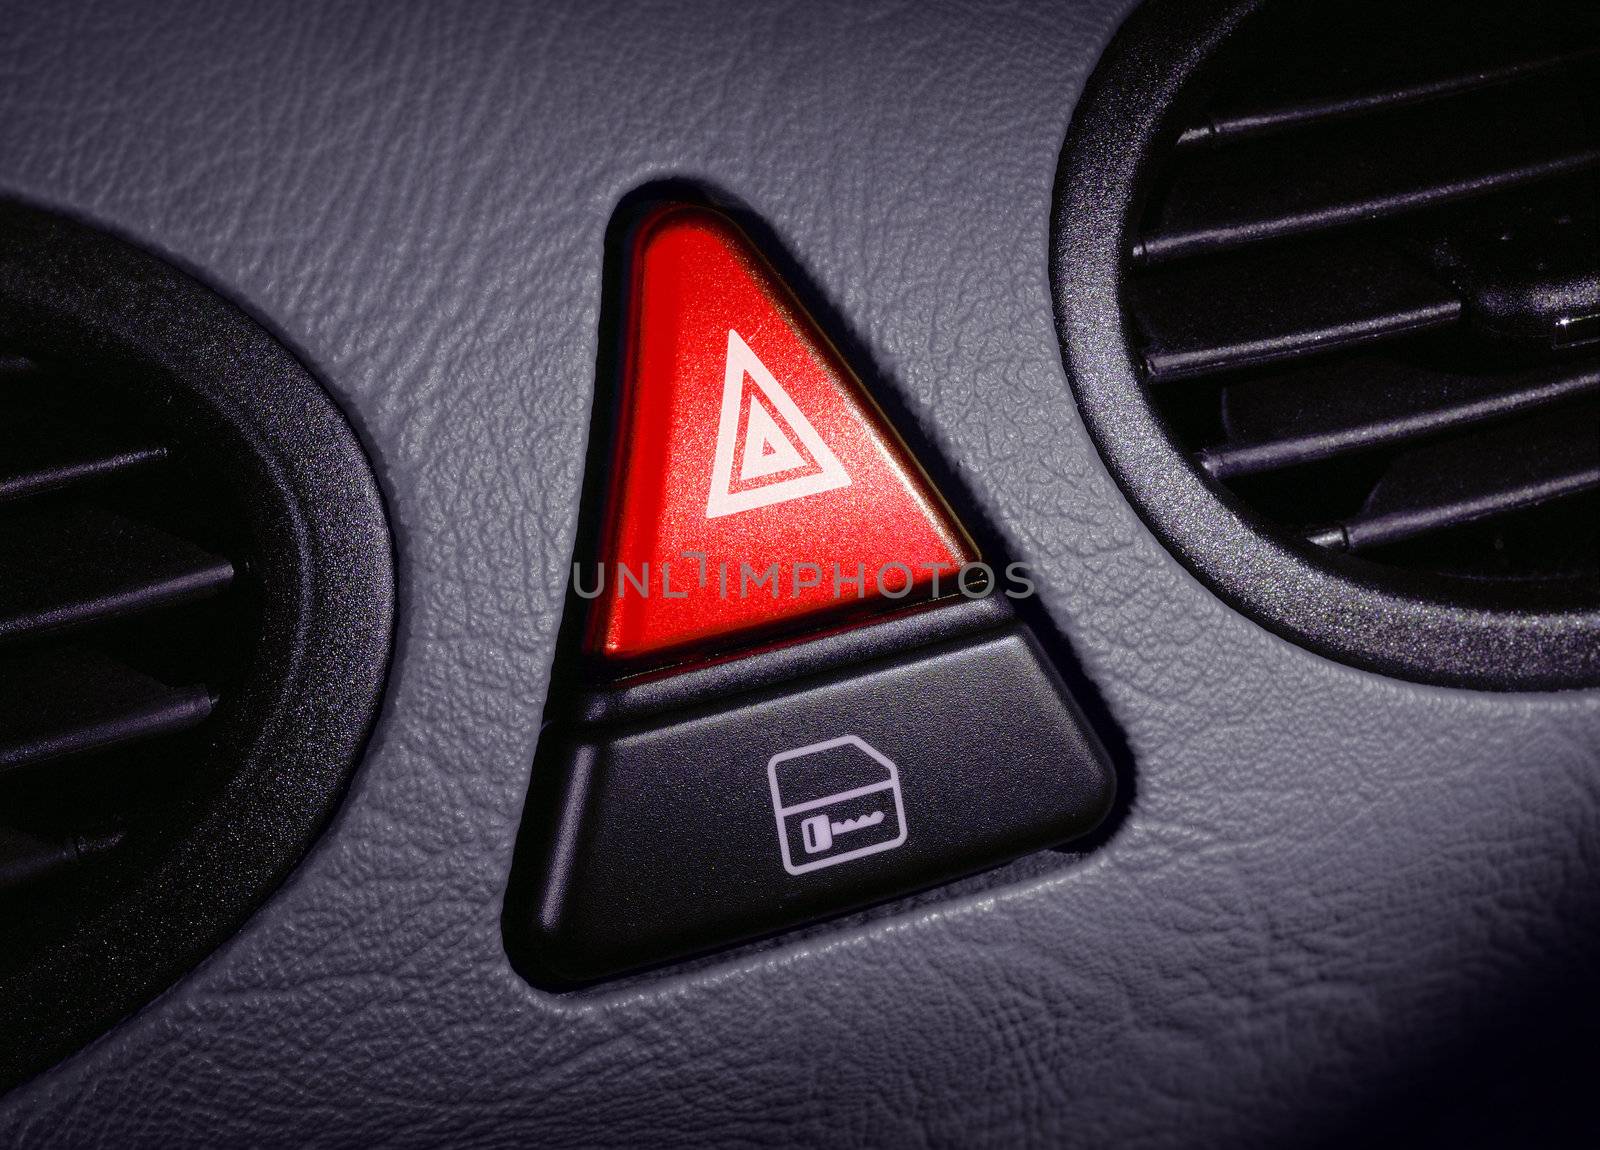 emergency button by ssuaphoto